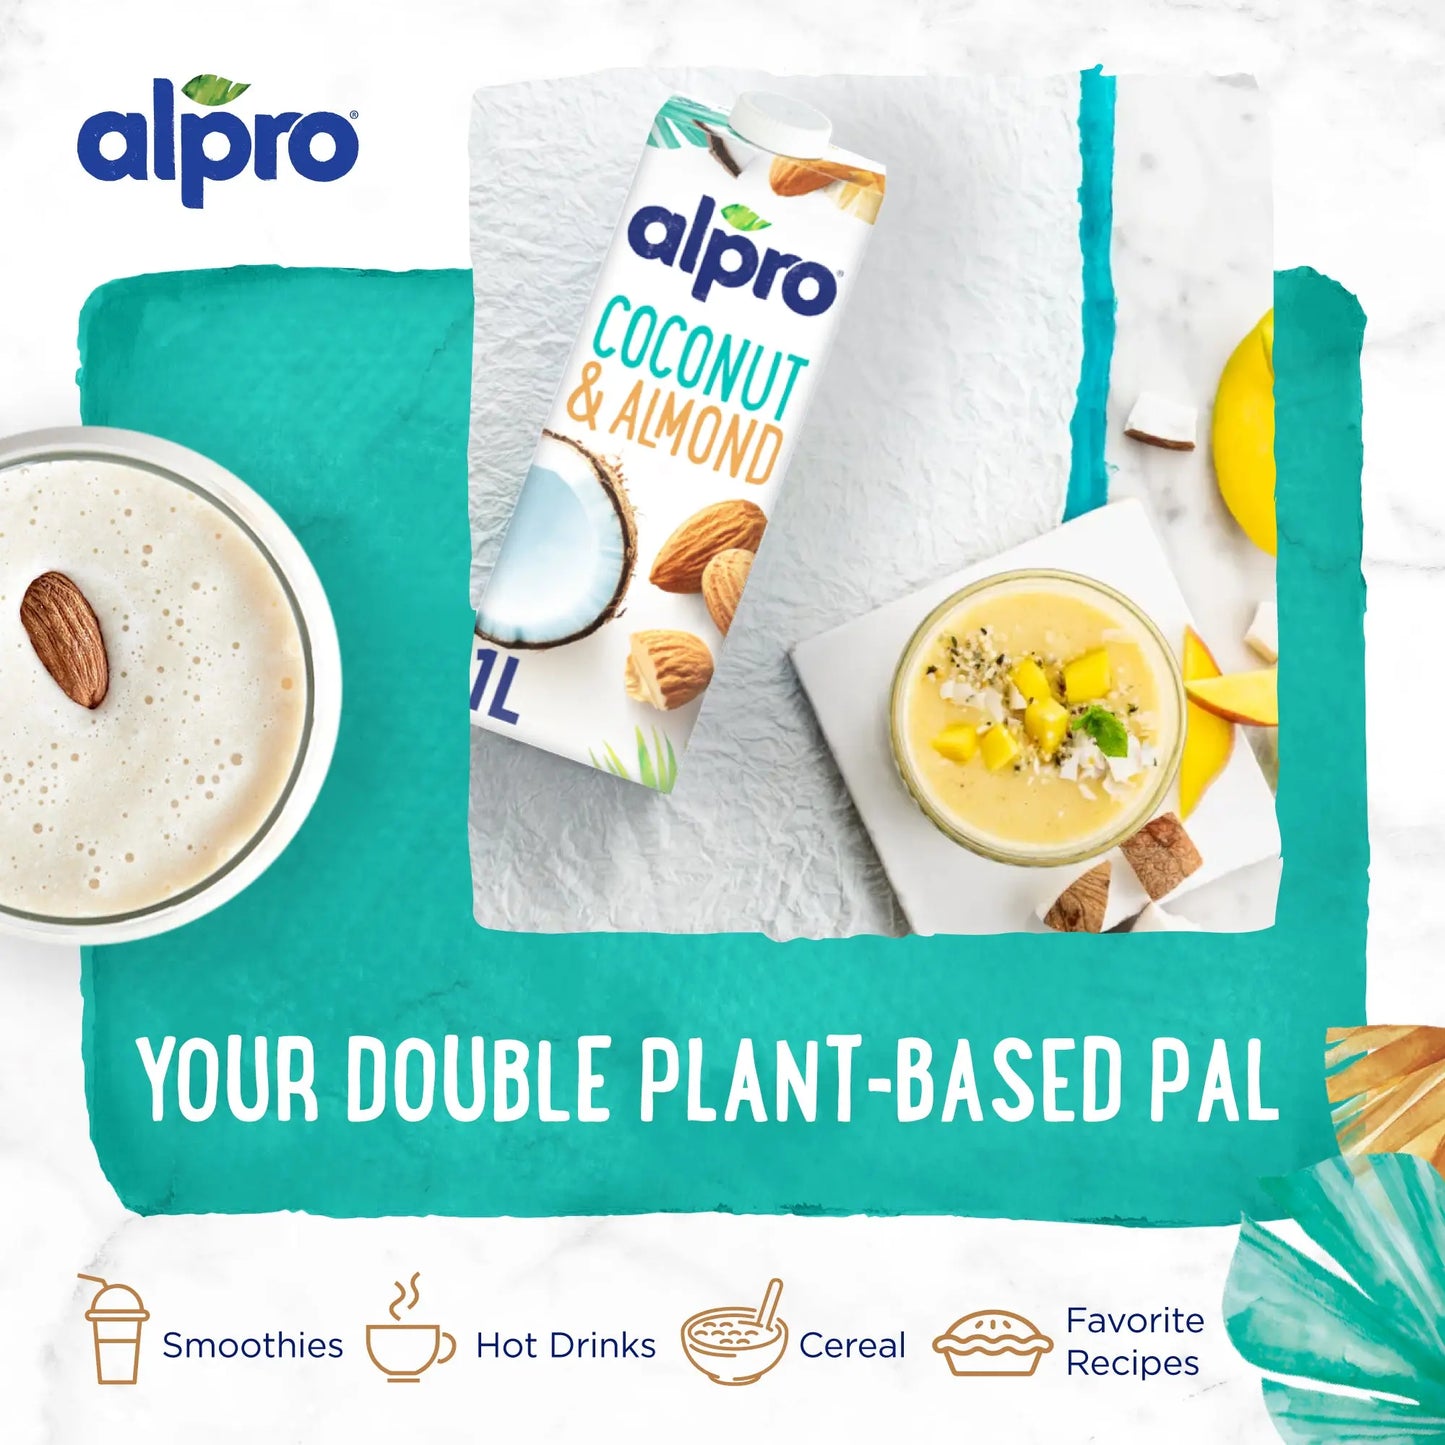 Alpro Drink Coconut-Almond Dual Pack (1l x 2), 100% Plant Based And Gluten & Dairy Free, Suitable For Vegans, Naturally Free From Lactose, Rich In Nutrients Alpro